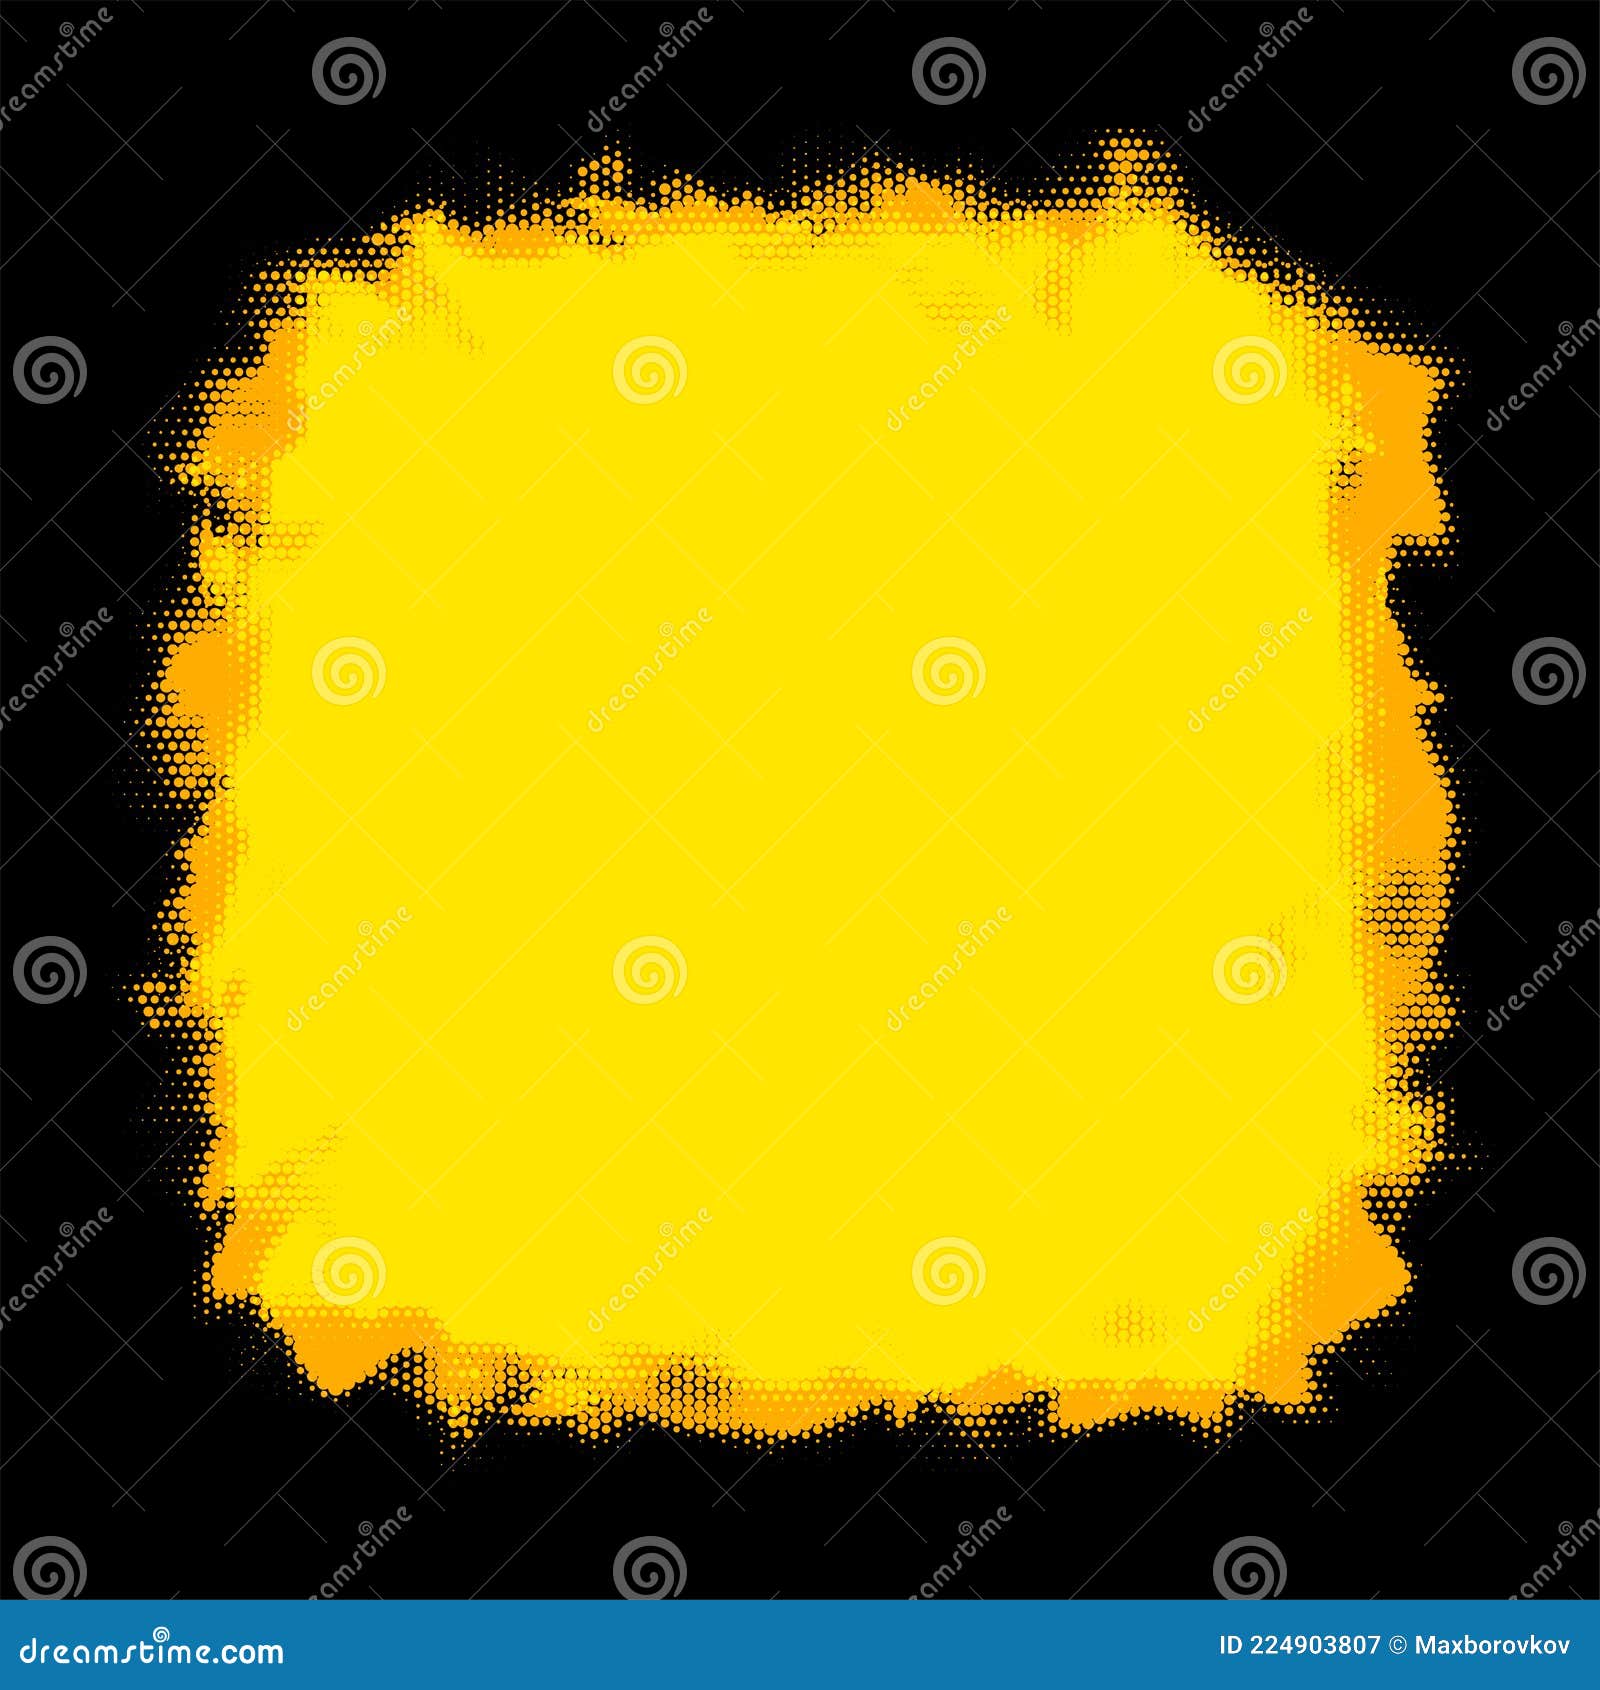 Abstract yellow background with black halftone Vector Image